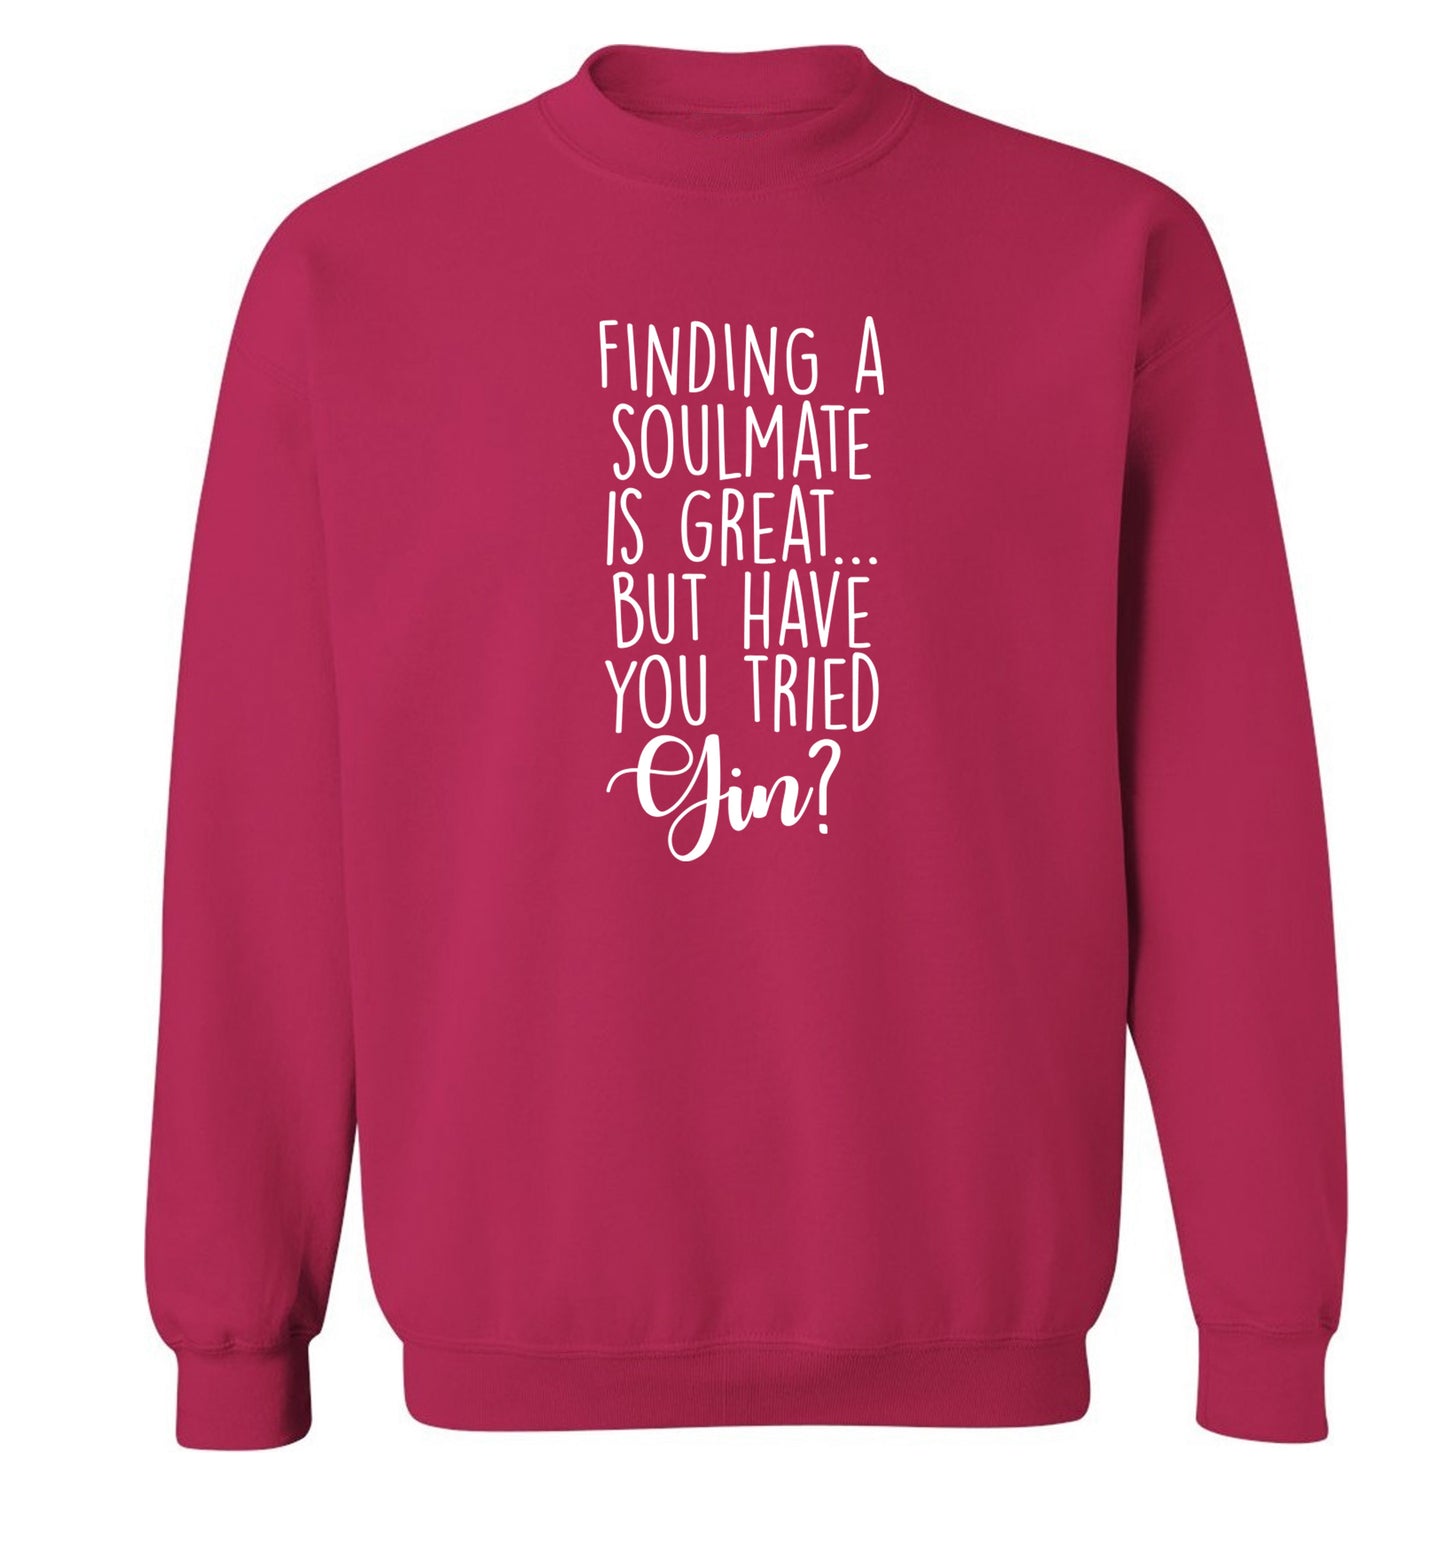 Finding a soulmate is great but have you tried gin? Adult's unisex pink Sweater 2XL